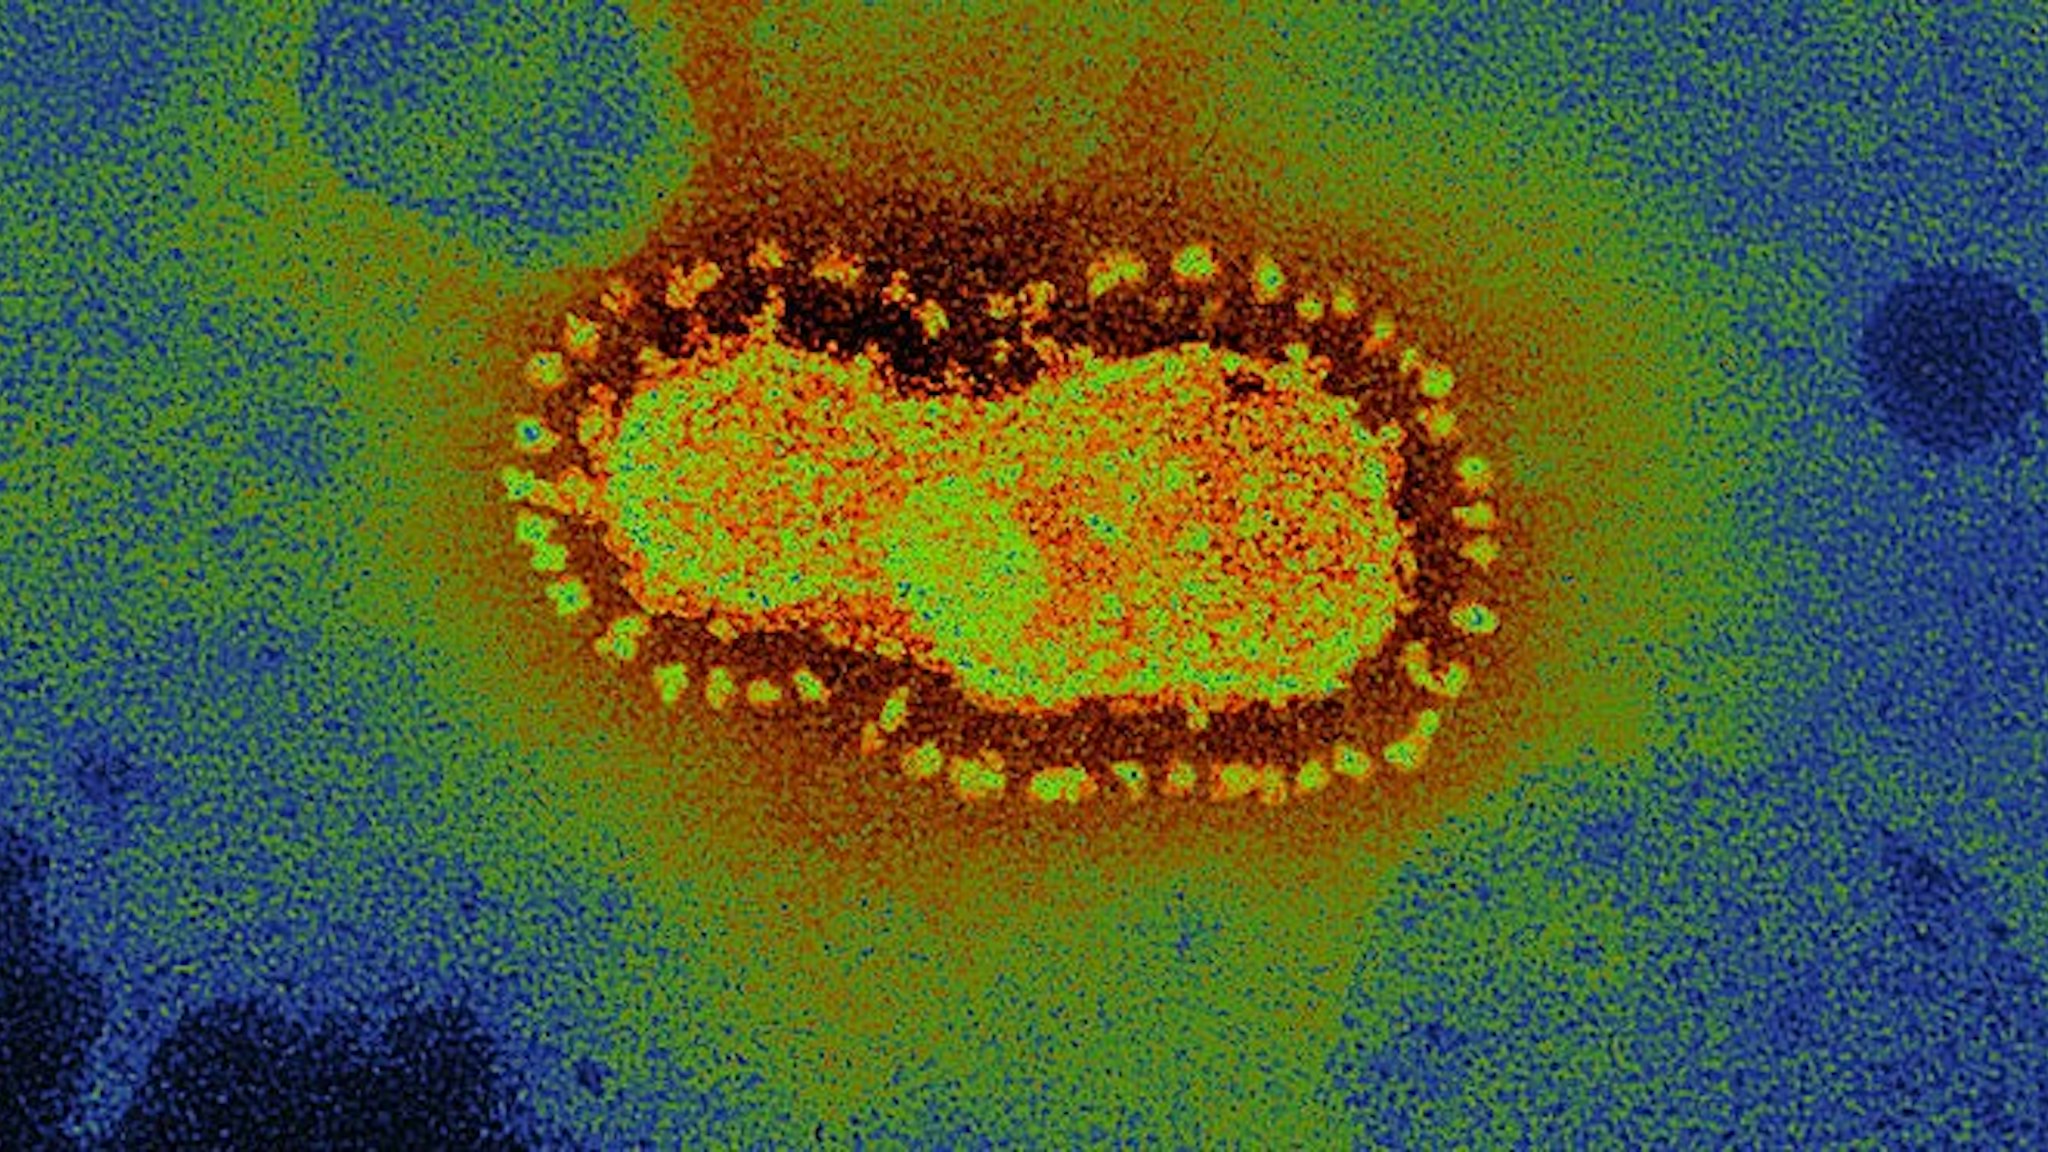 he Crown Shape Of This Virus Gives Its Name, Coronovirus. The Crown Encircles The Viral Capside A Protein Structure Protecting The Viral Nucleic Acid. This Virus Was Isolated From The Fecal Matter Of A Patient With Diarrhea. Colored Transmission Electron Microscopy X 95,000 (Photo By B